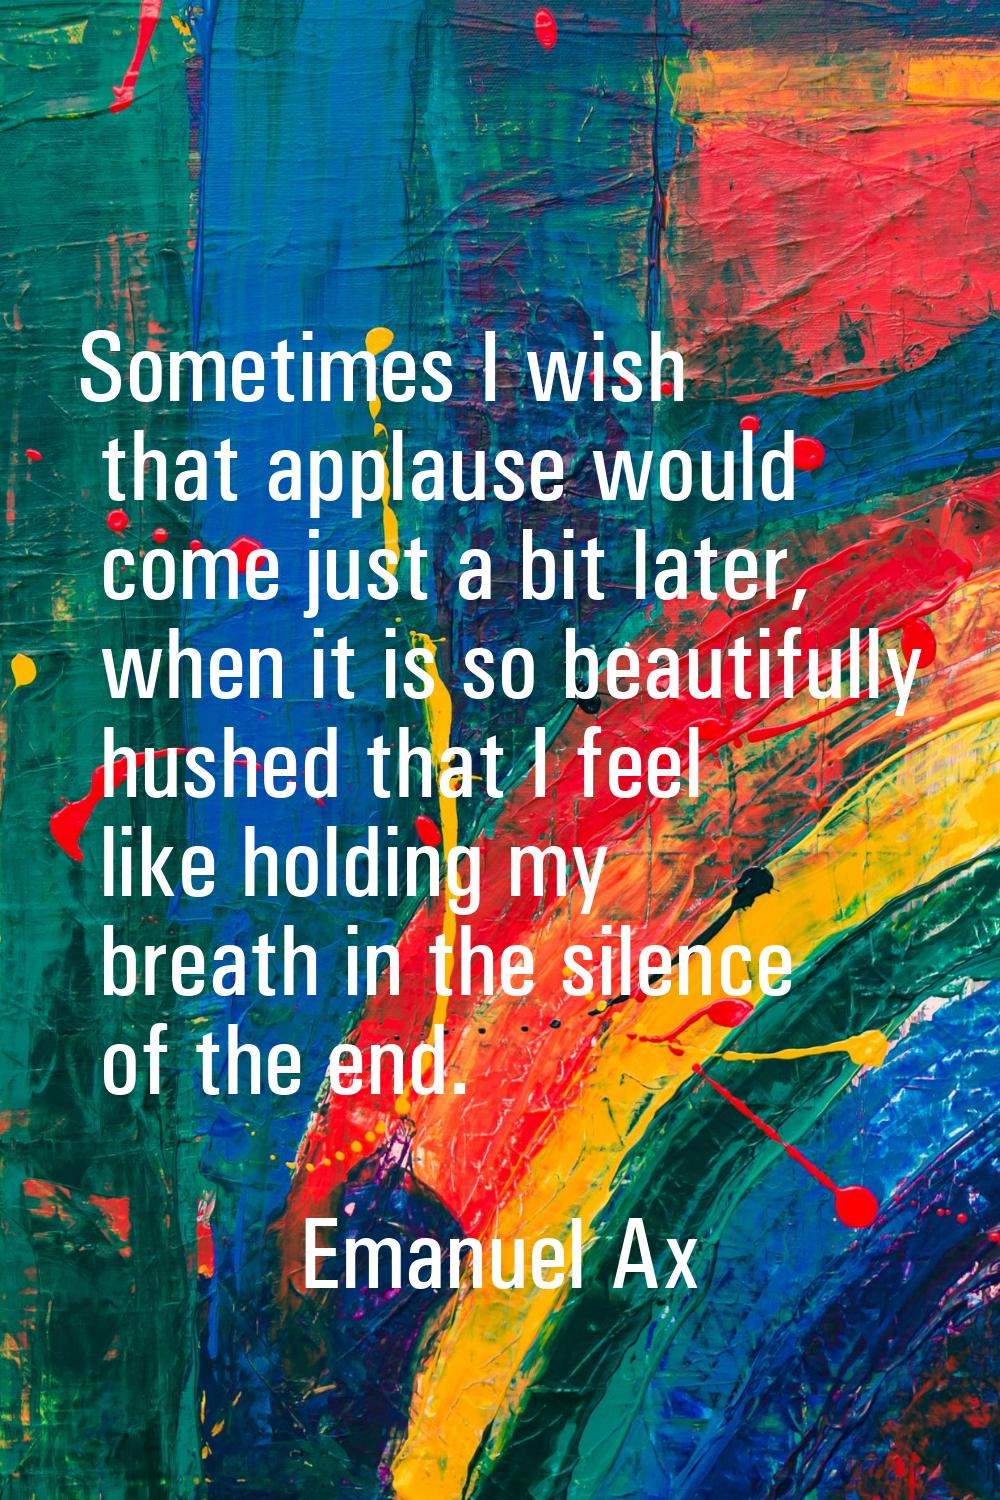 Sometimes I wish that applause would come just a bit later, when it is so beautifully hushed that I